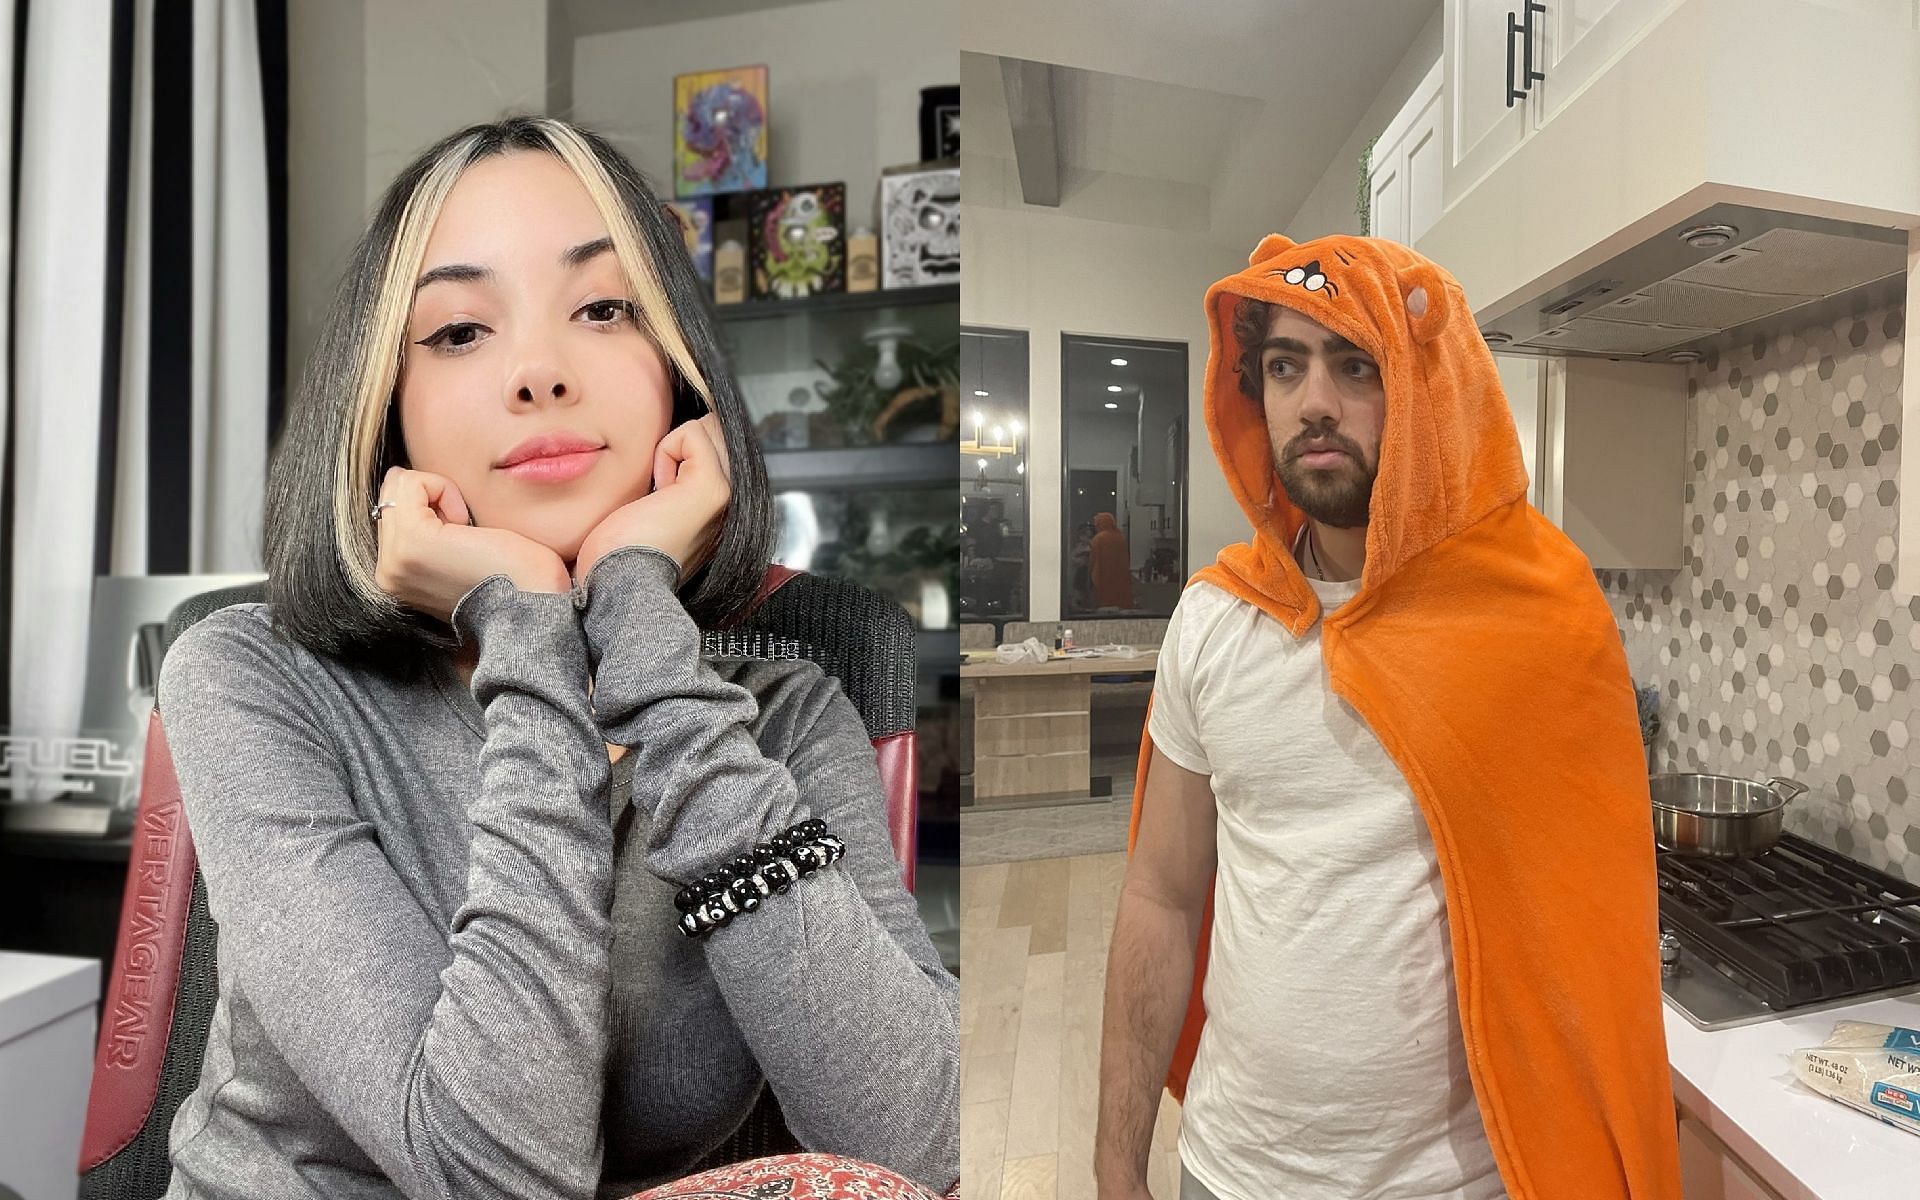 Mizkif was joined by content creator Susu_jpg during one of his latest streams (Images via Mizkif and susu_jpg/Twitter)